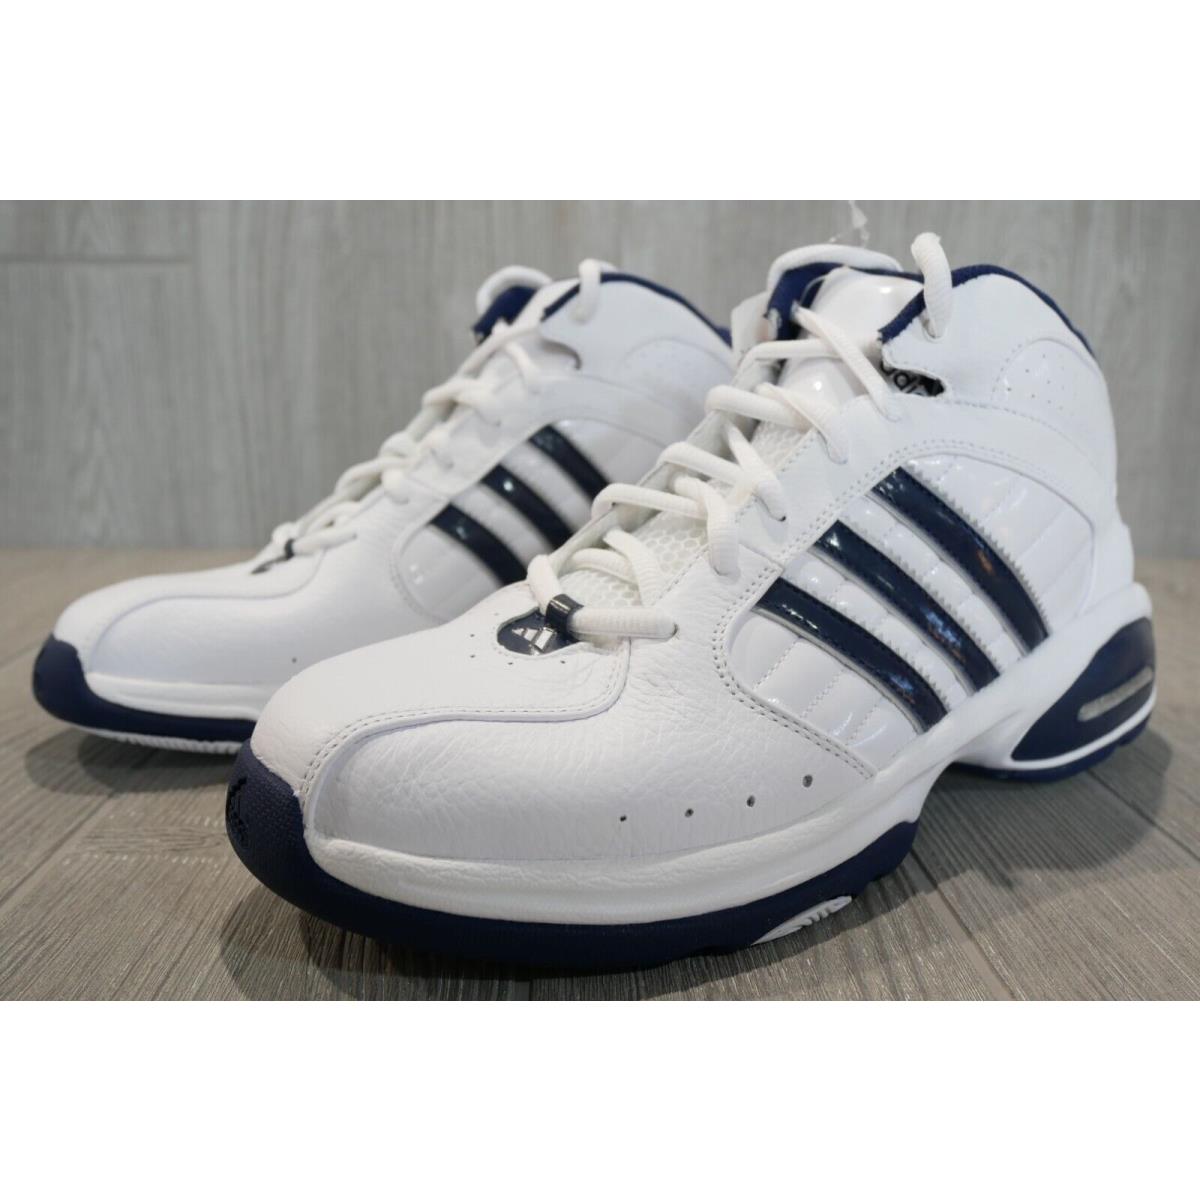 Vintage Adidas Half Court Leather Basketball Shoes 2005 Mens 12 Oss |  692740364568 - Adidas shoes Court - White | SporTipTop